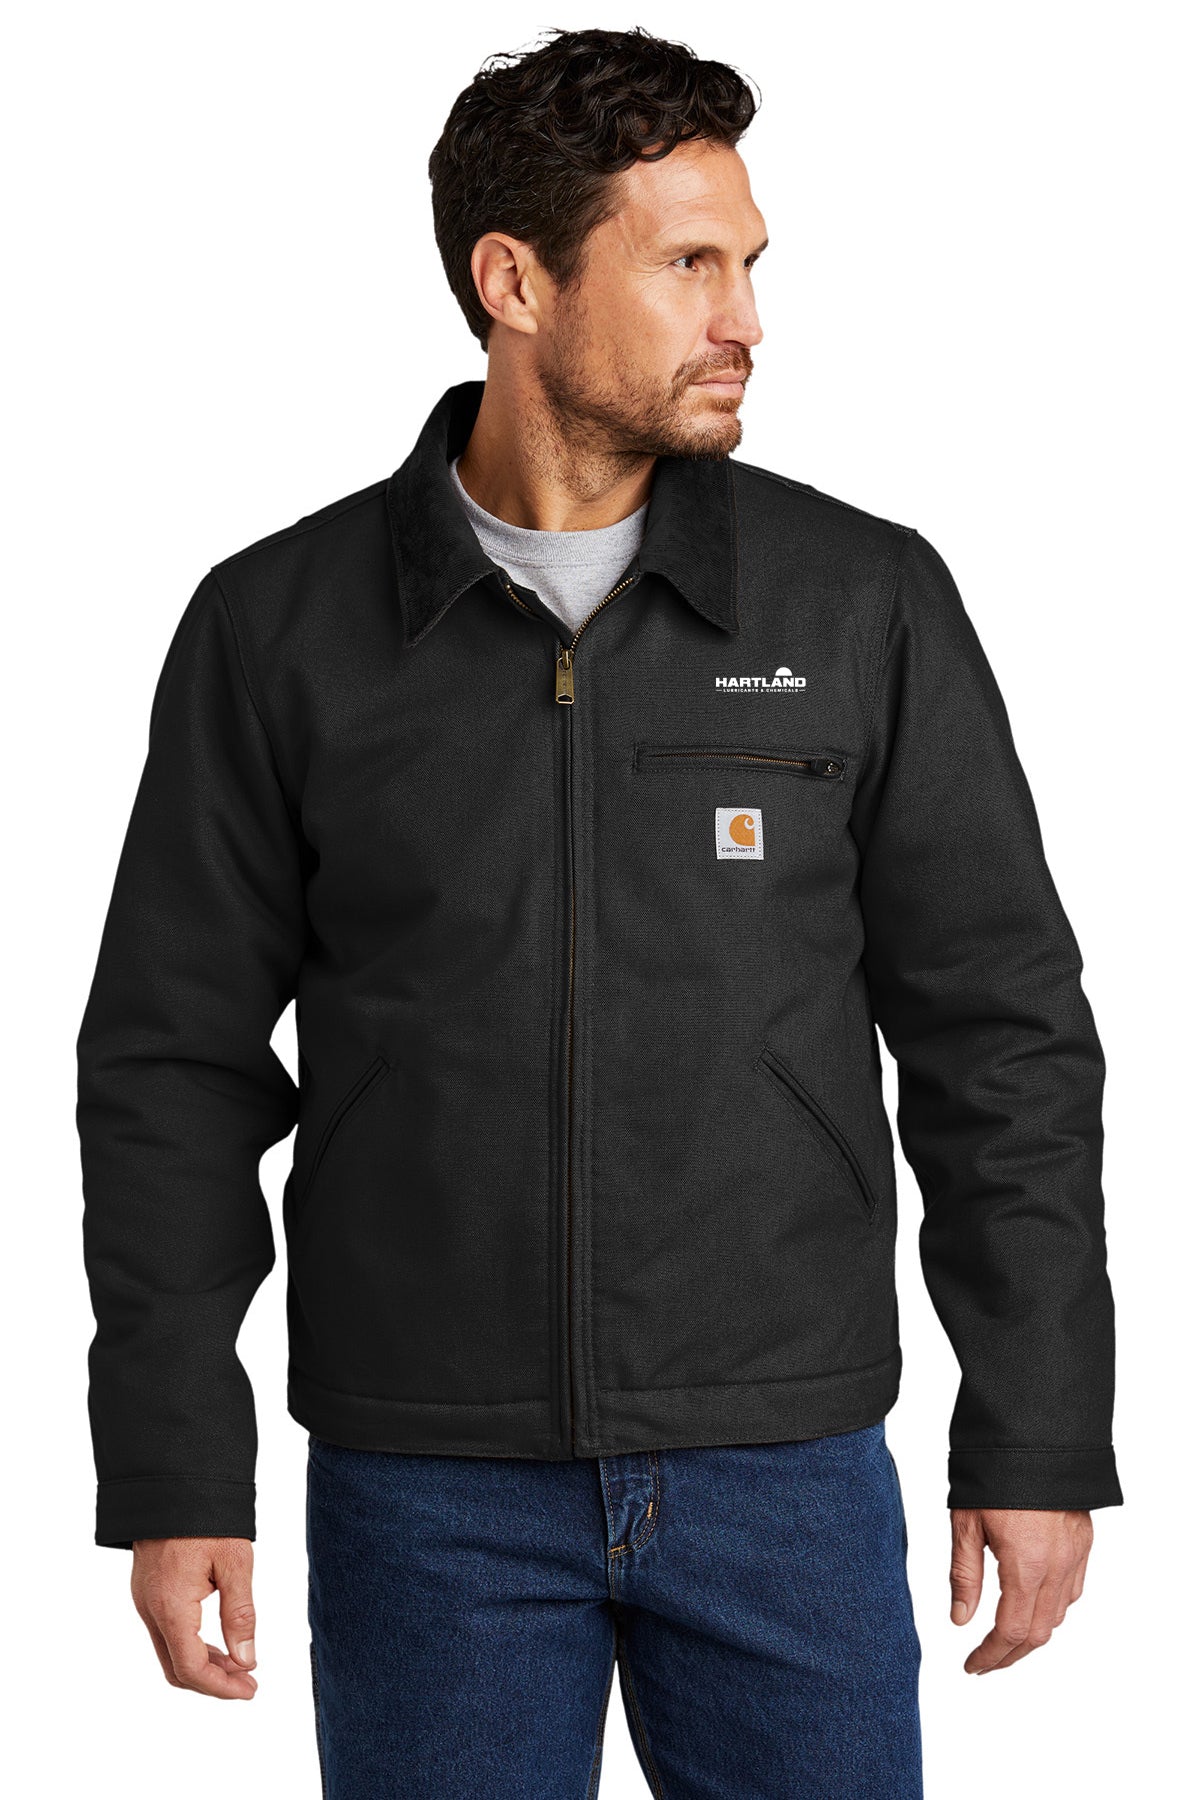 Hartland Lubricants and Chemicals Carhartt® Detroit Jacket